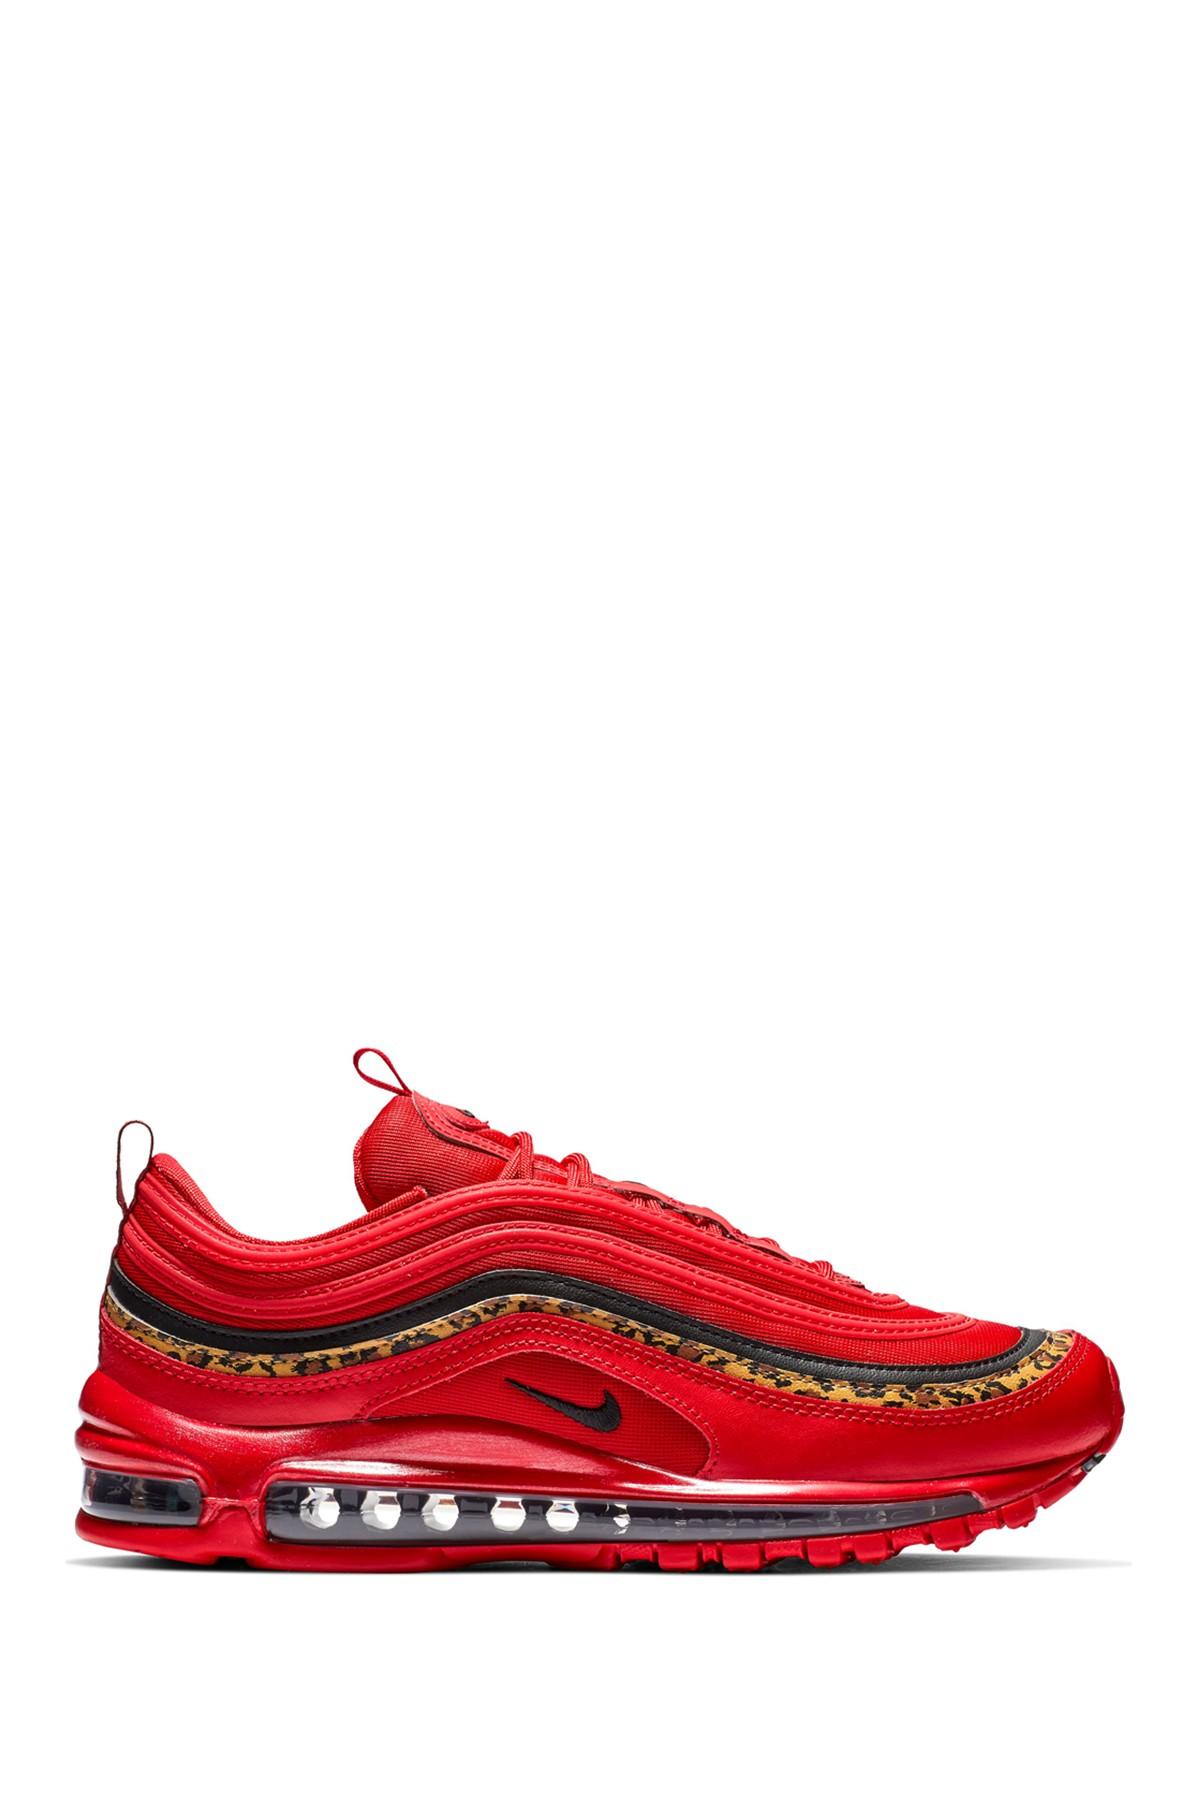 Nike Synthetic Air Max 97 Sneakers in Red/Black (Red) - Save 62% | Lyst